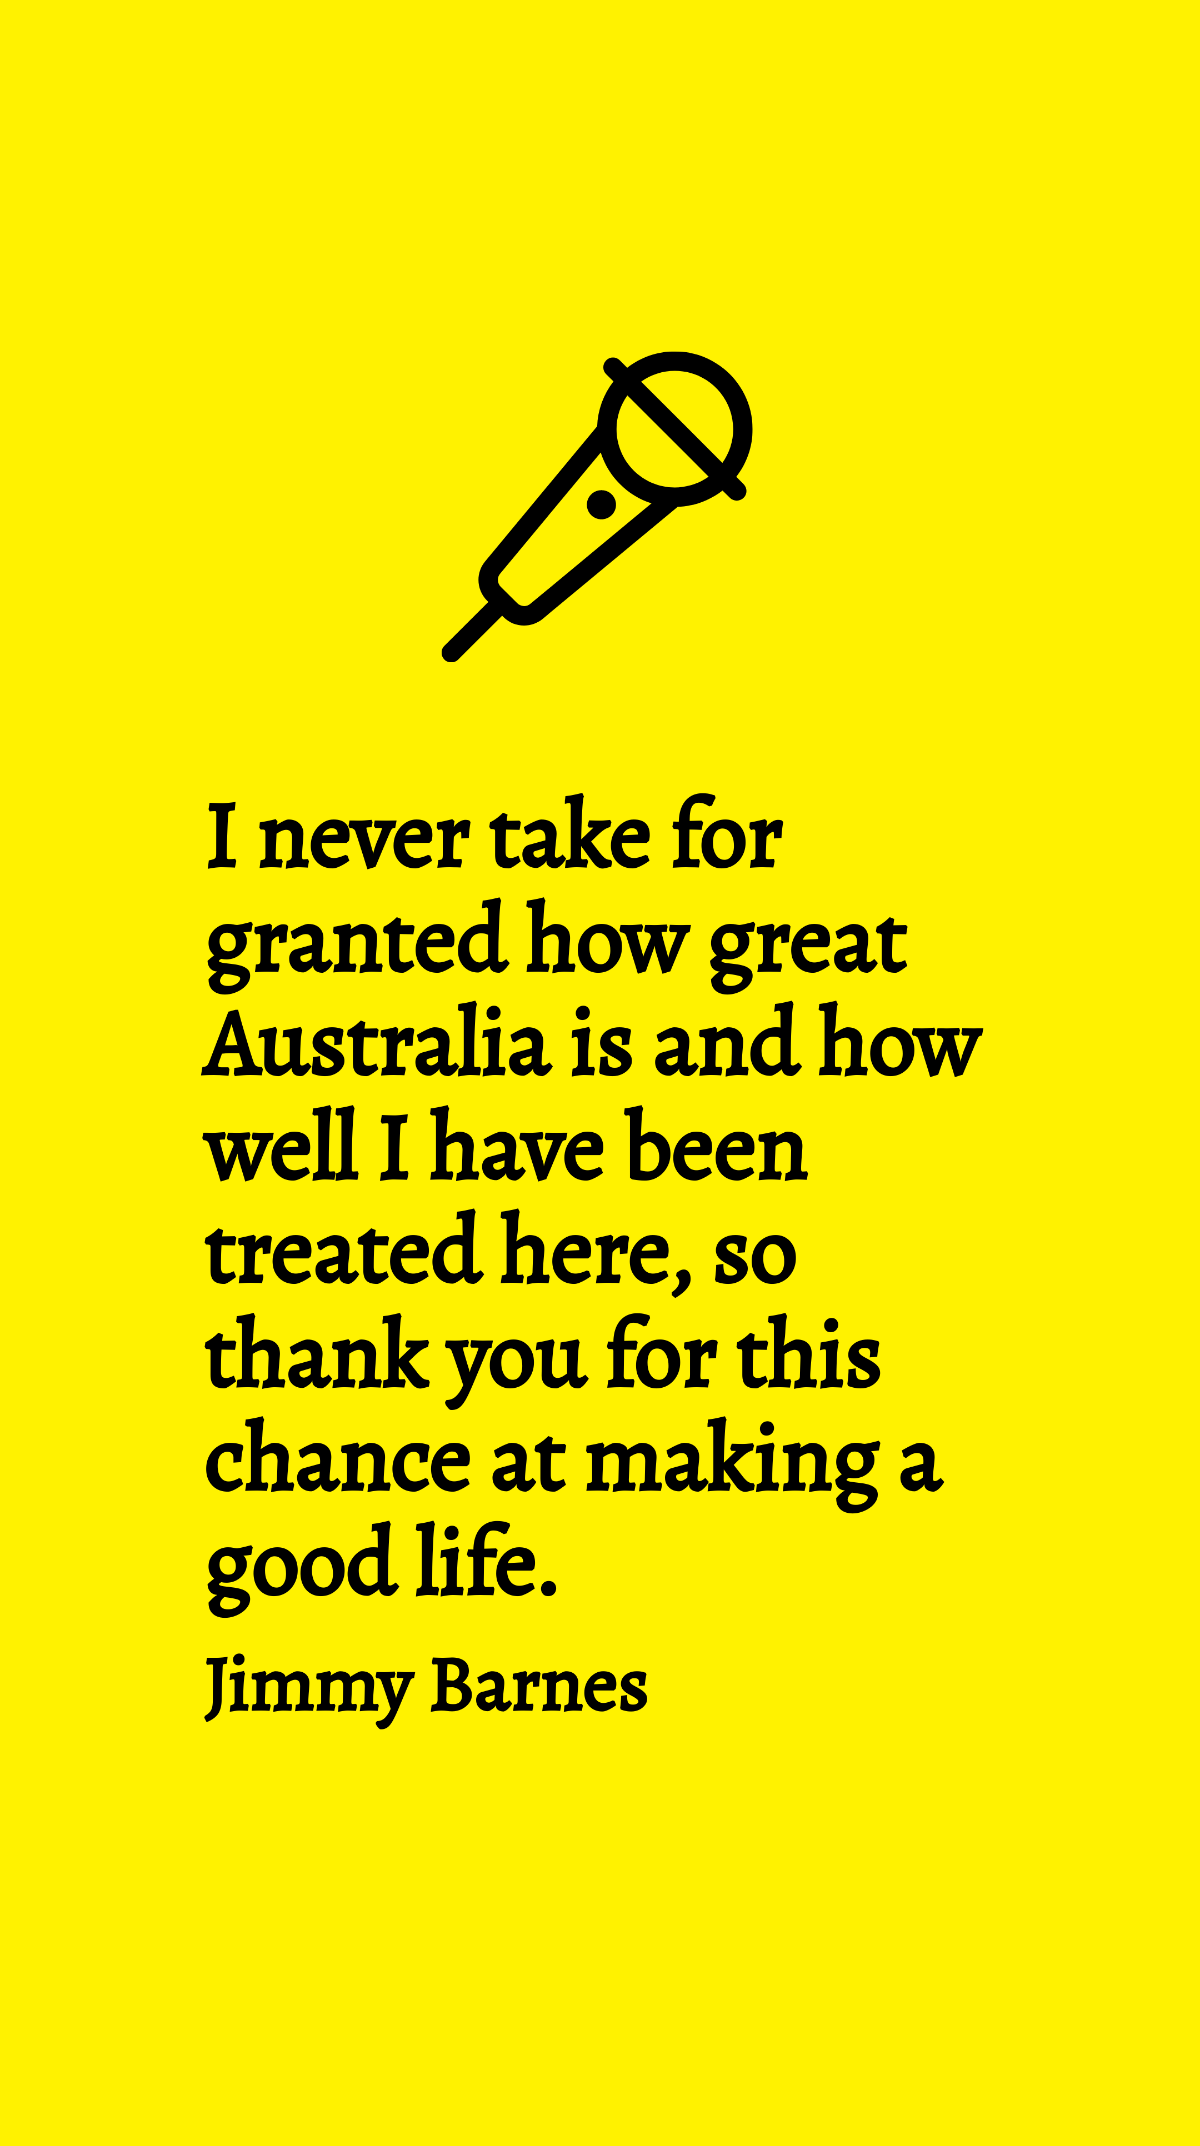 Free Jimmy Barnes - I never take for granted how great Australia is and how well I have been treated here, so thank you for this chance at making a good life. Template